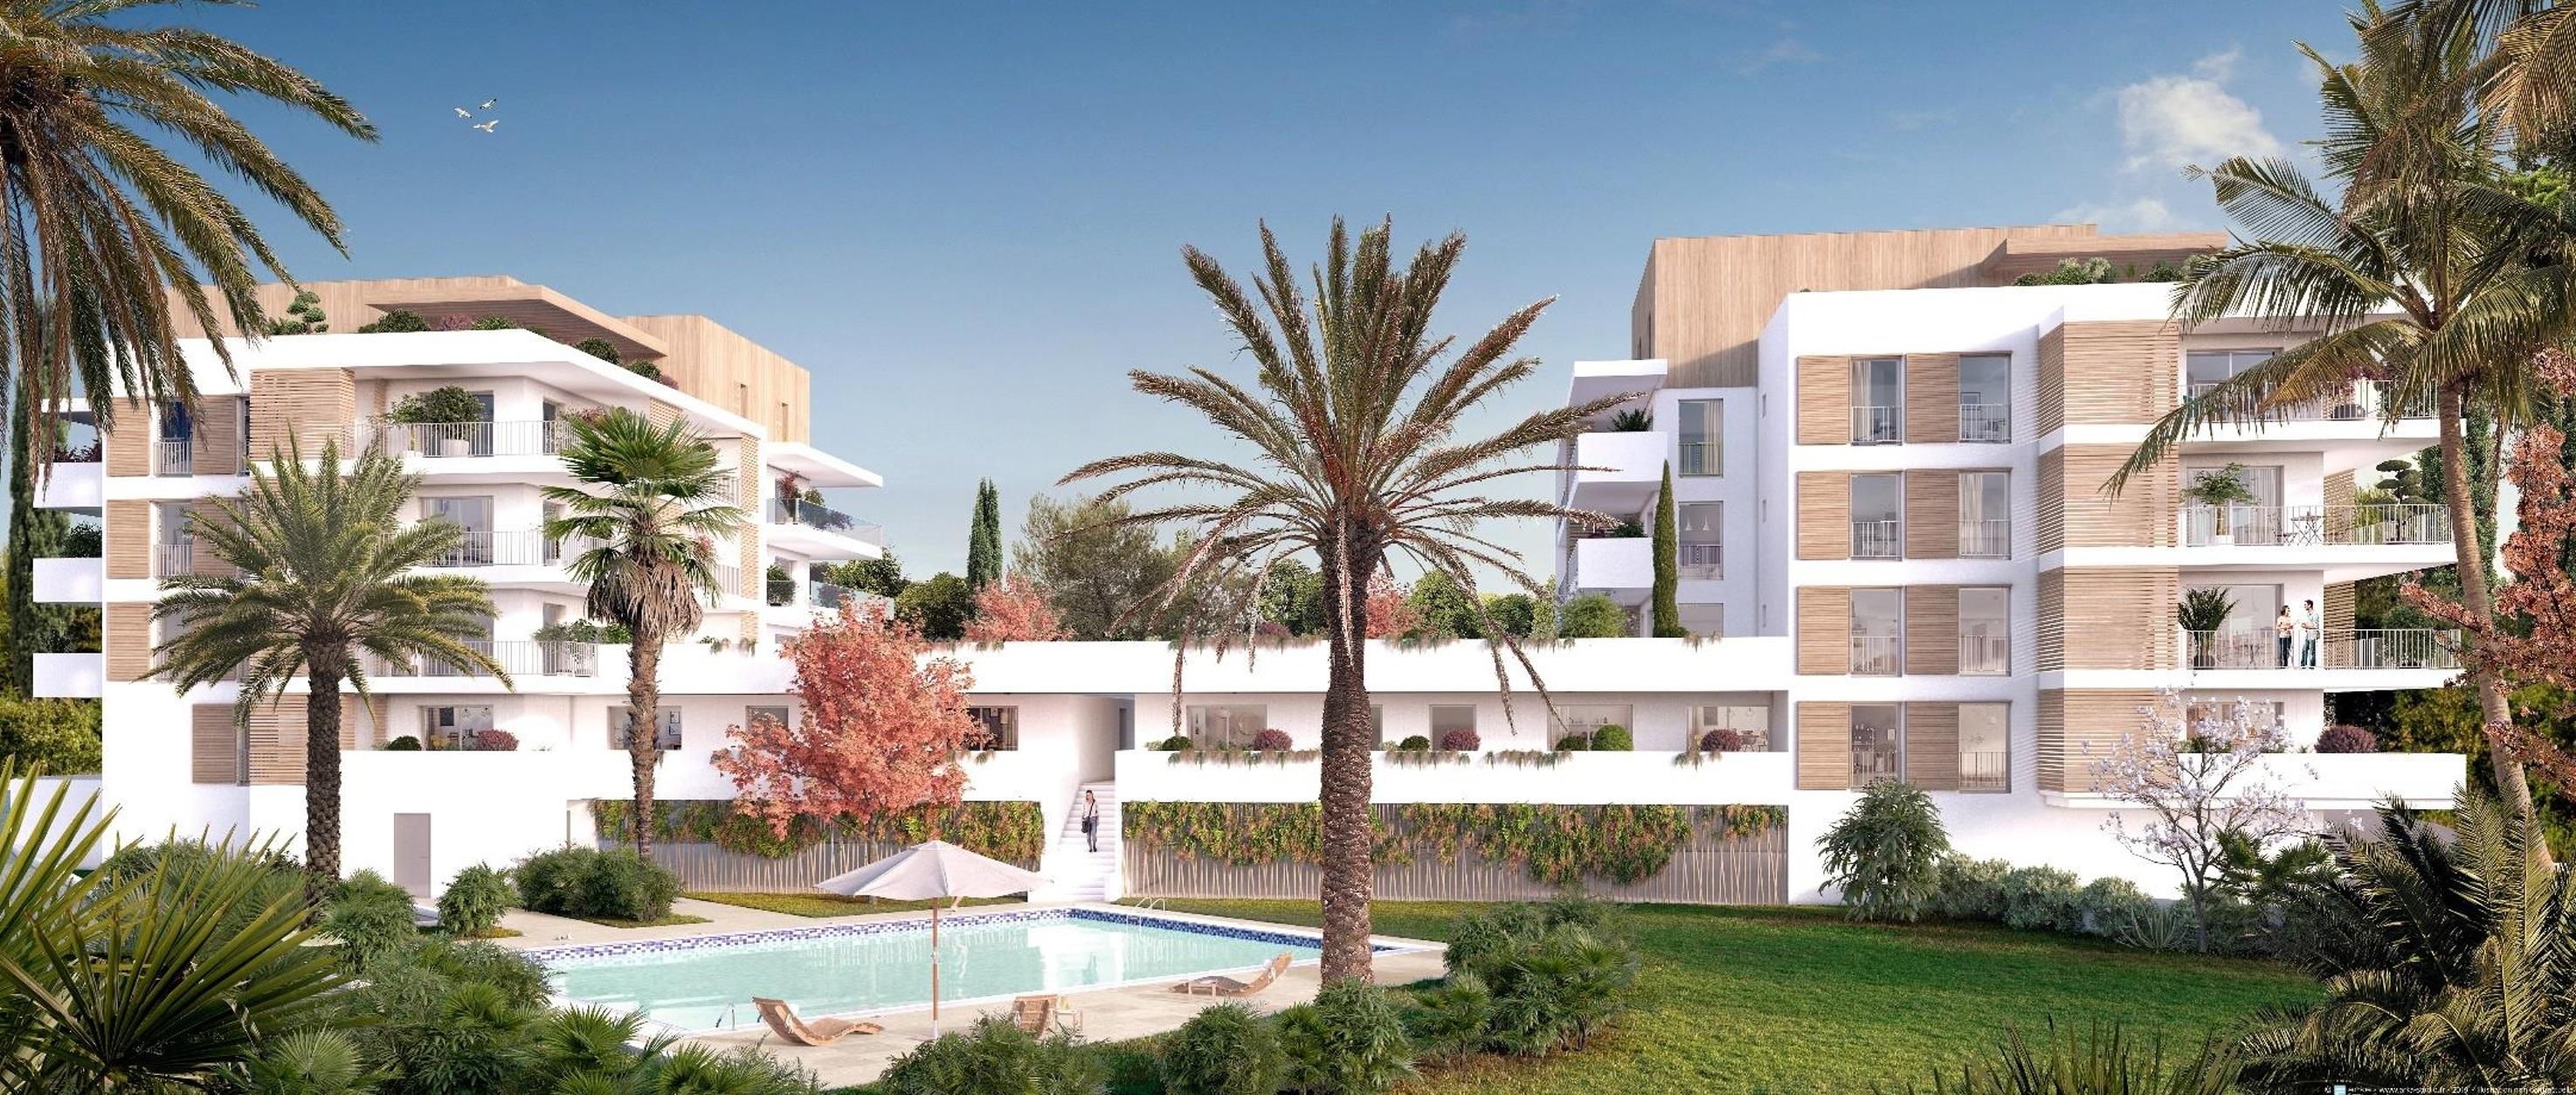 Programme immobilier neuf 06600 Antibes Immobilier neuf Antibes 6582